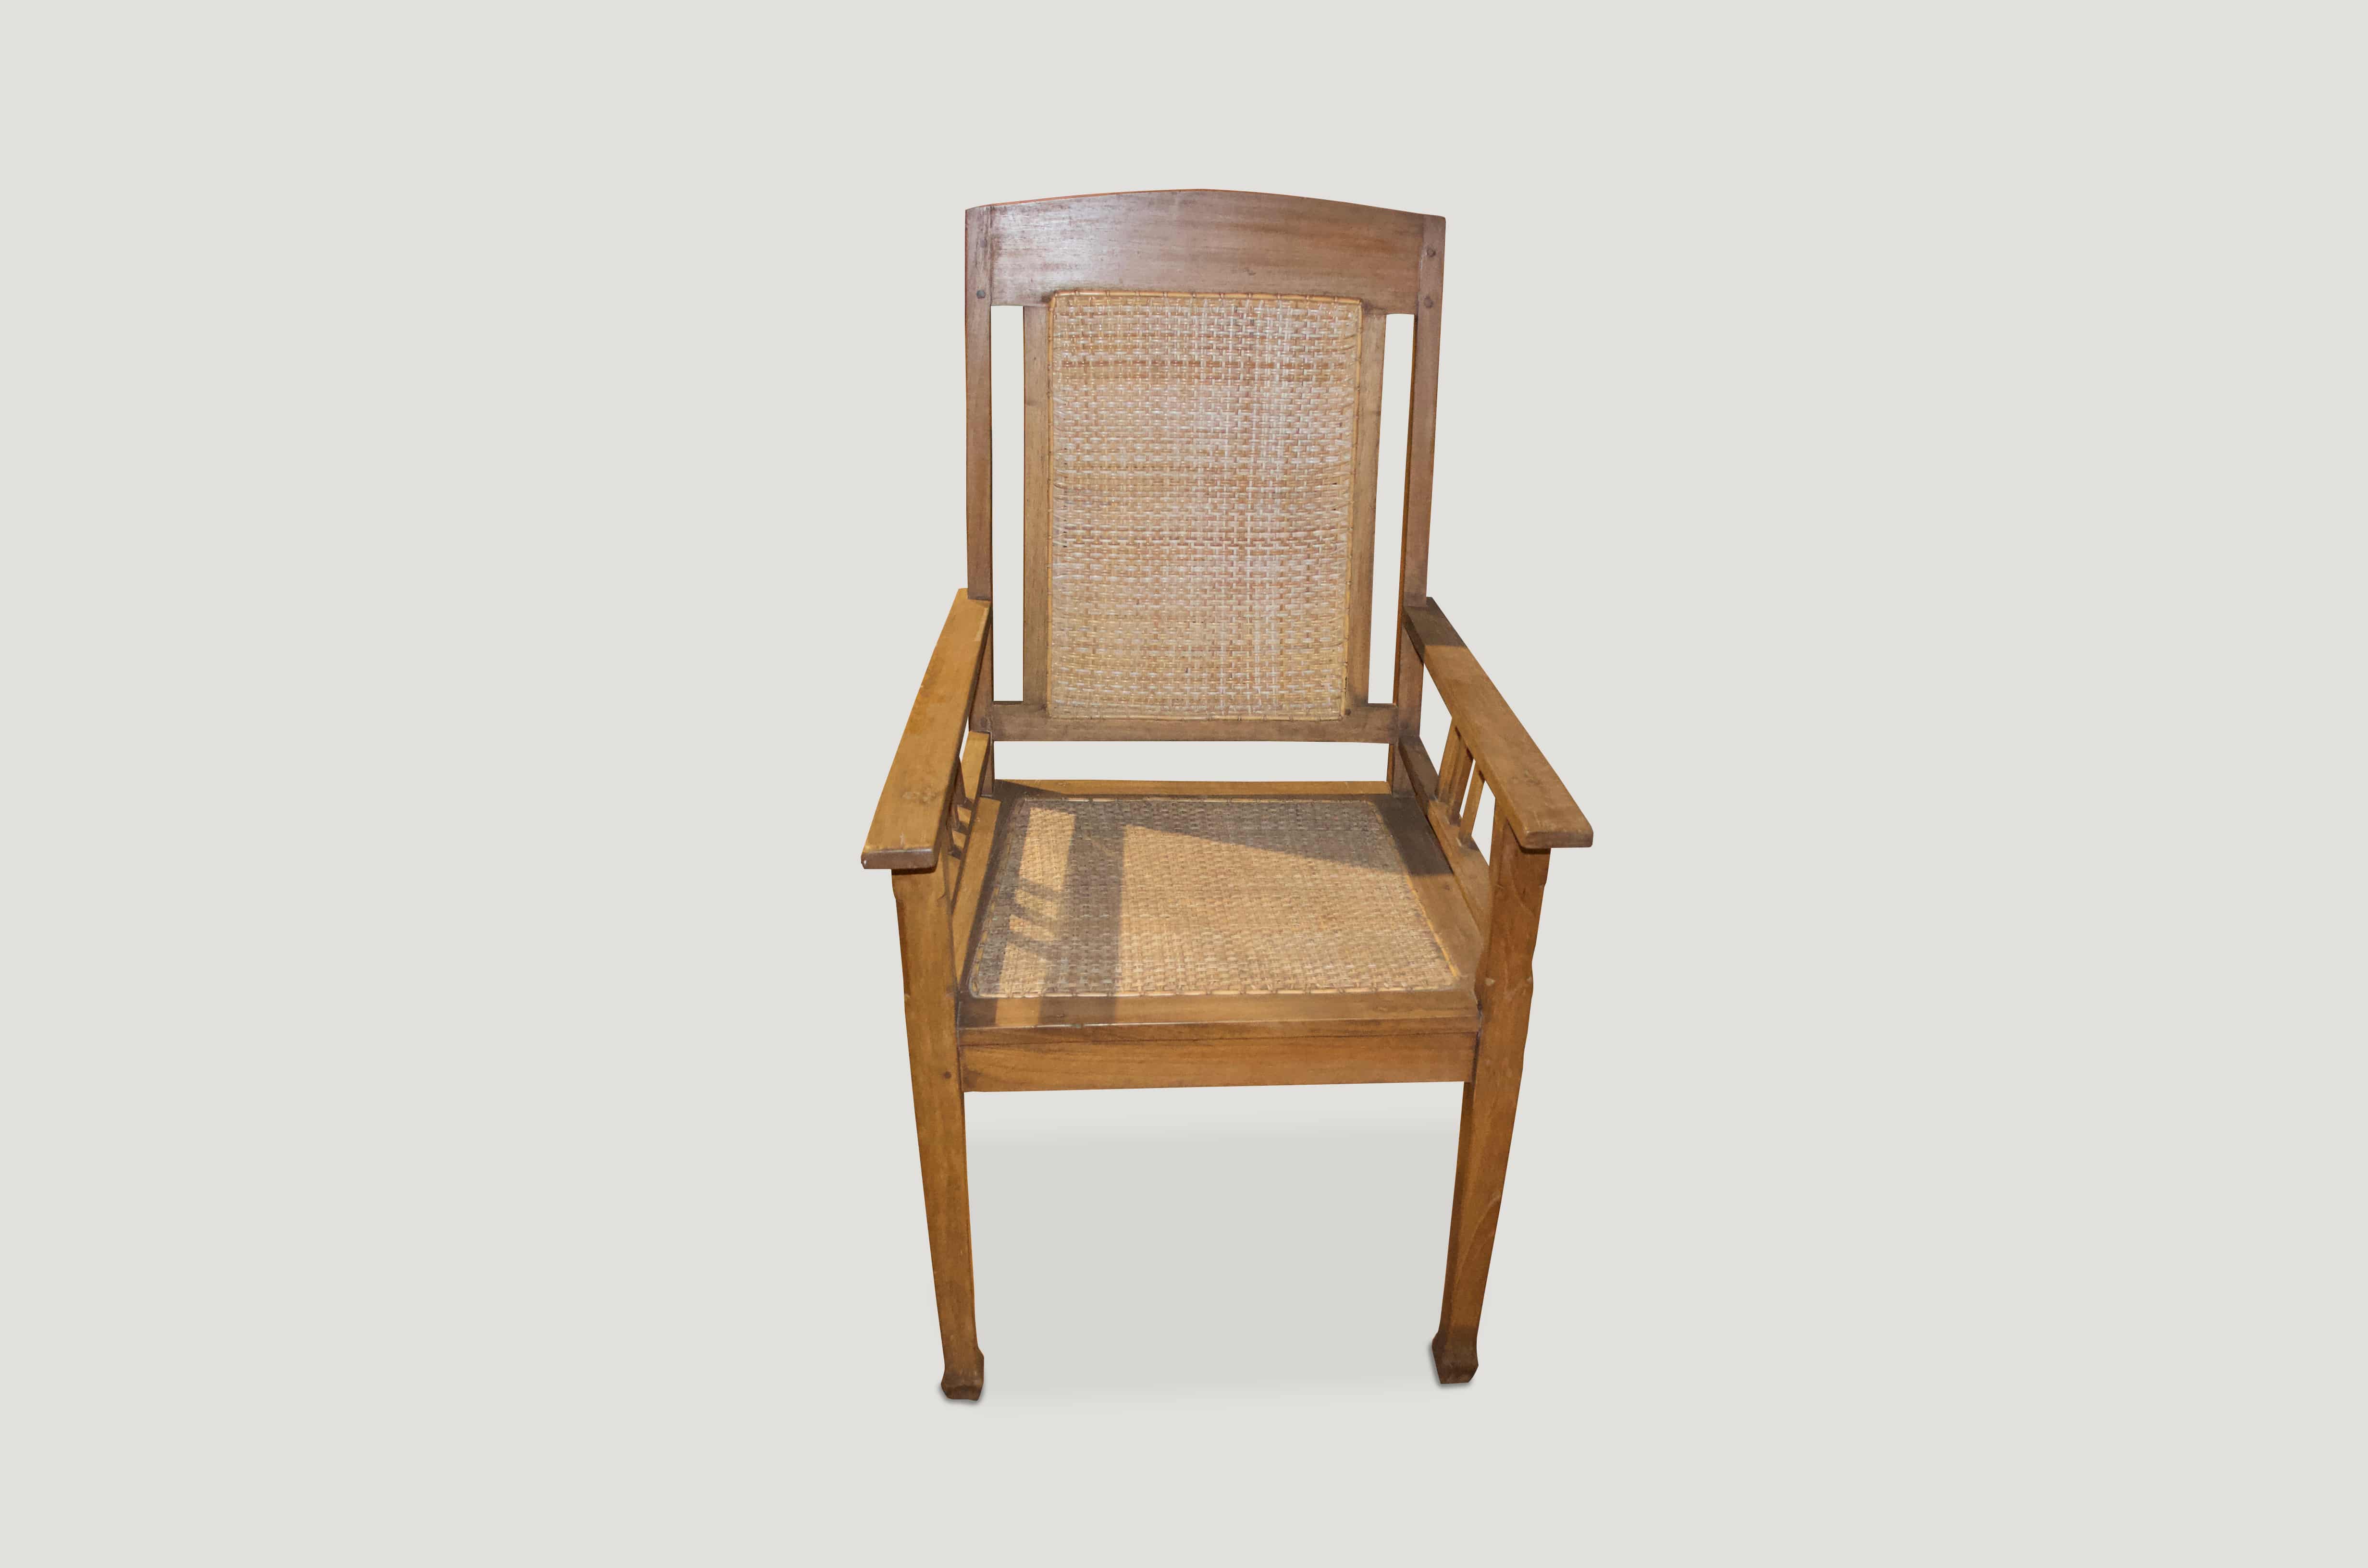 Antique Colonial teak chair with hand-woven rattan